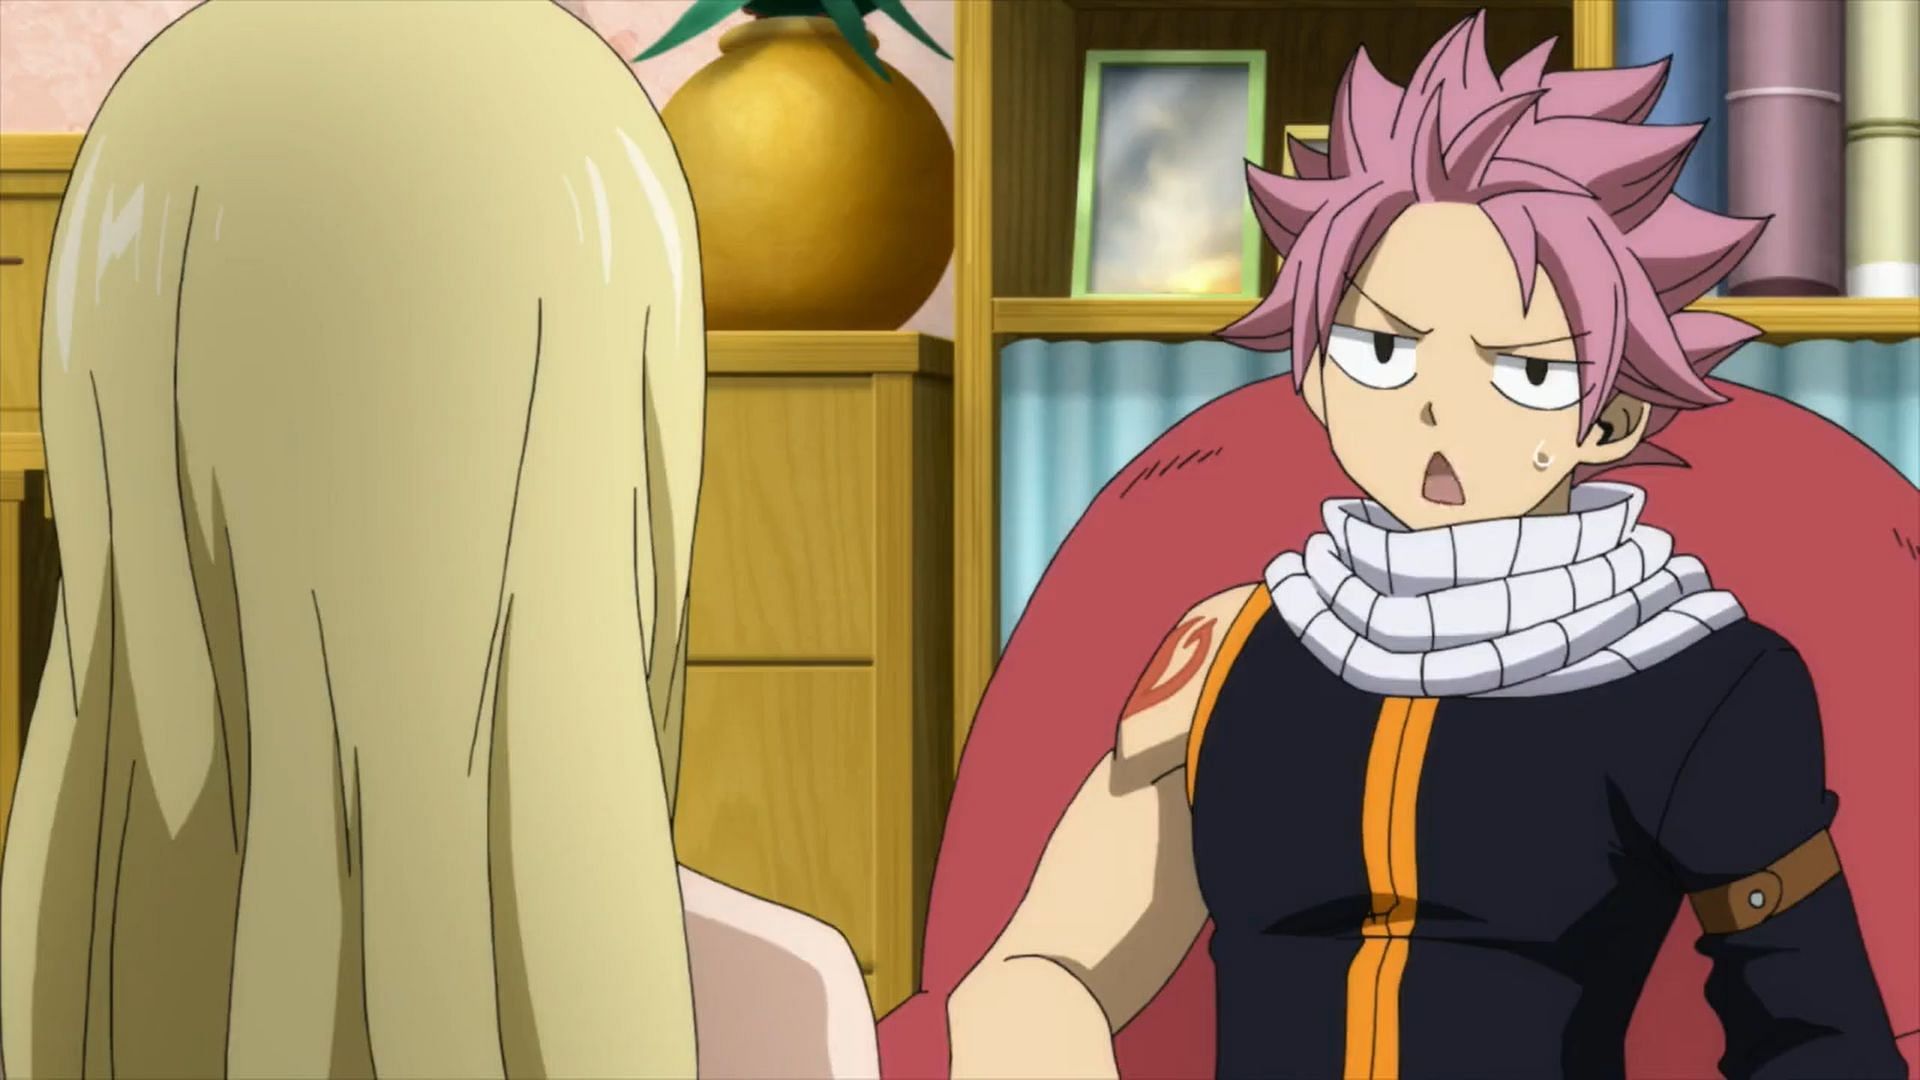 Natsu speaking to Lucy in the 2018 series (Image via A-1 Pictures, Bridge, CloverWorks)